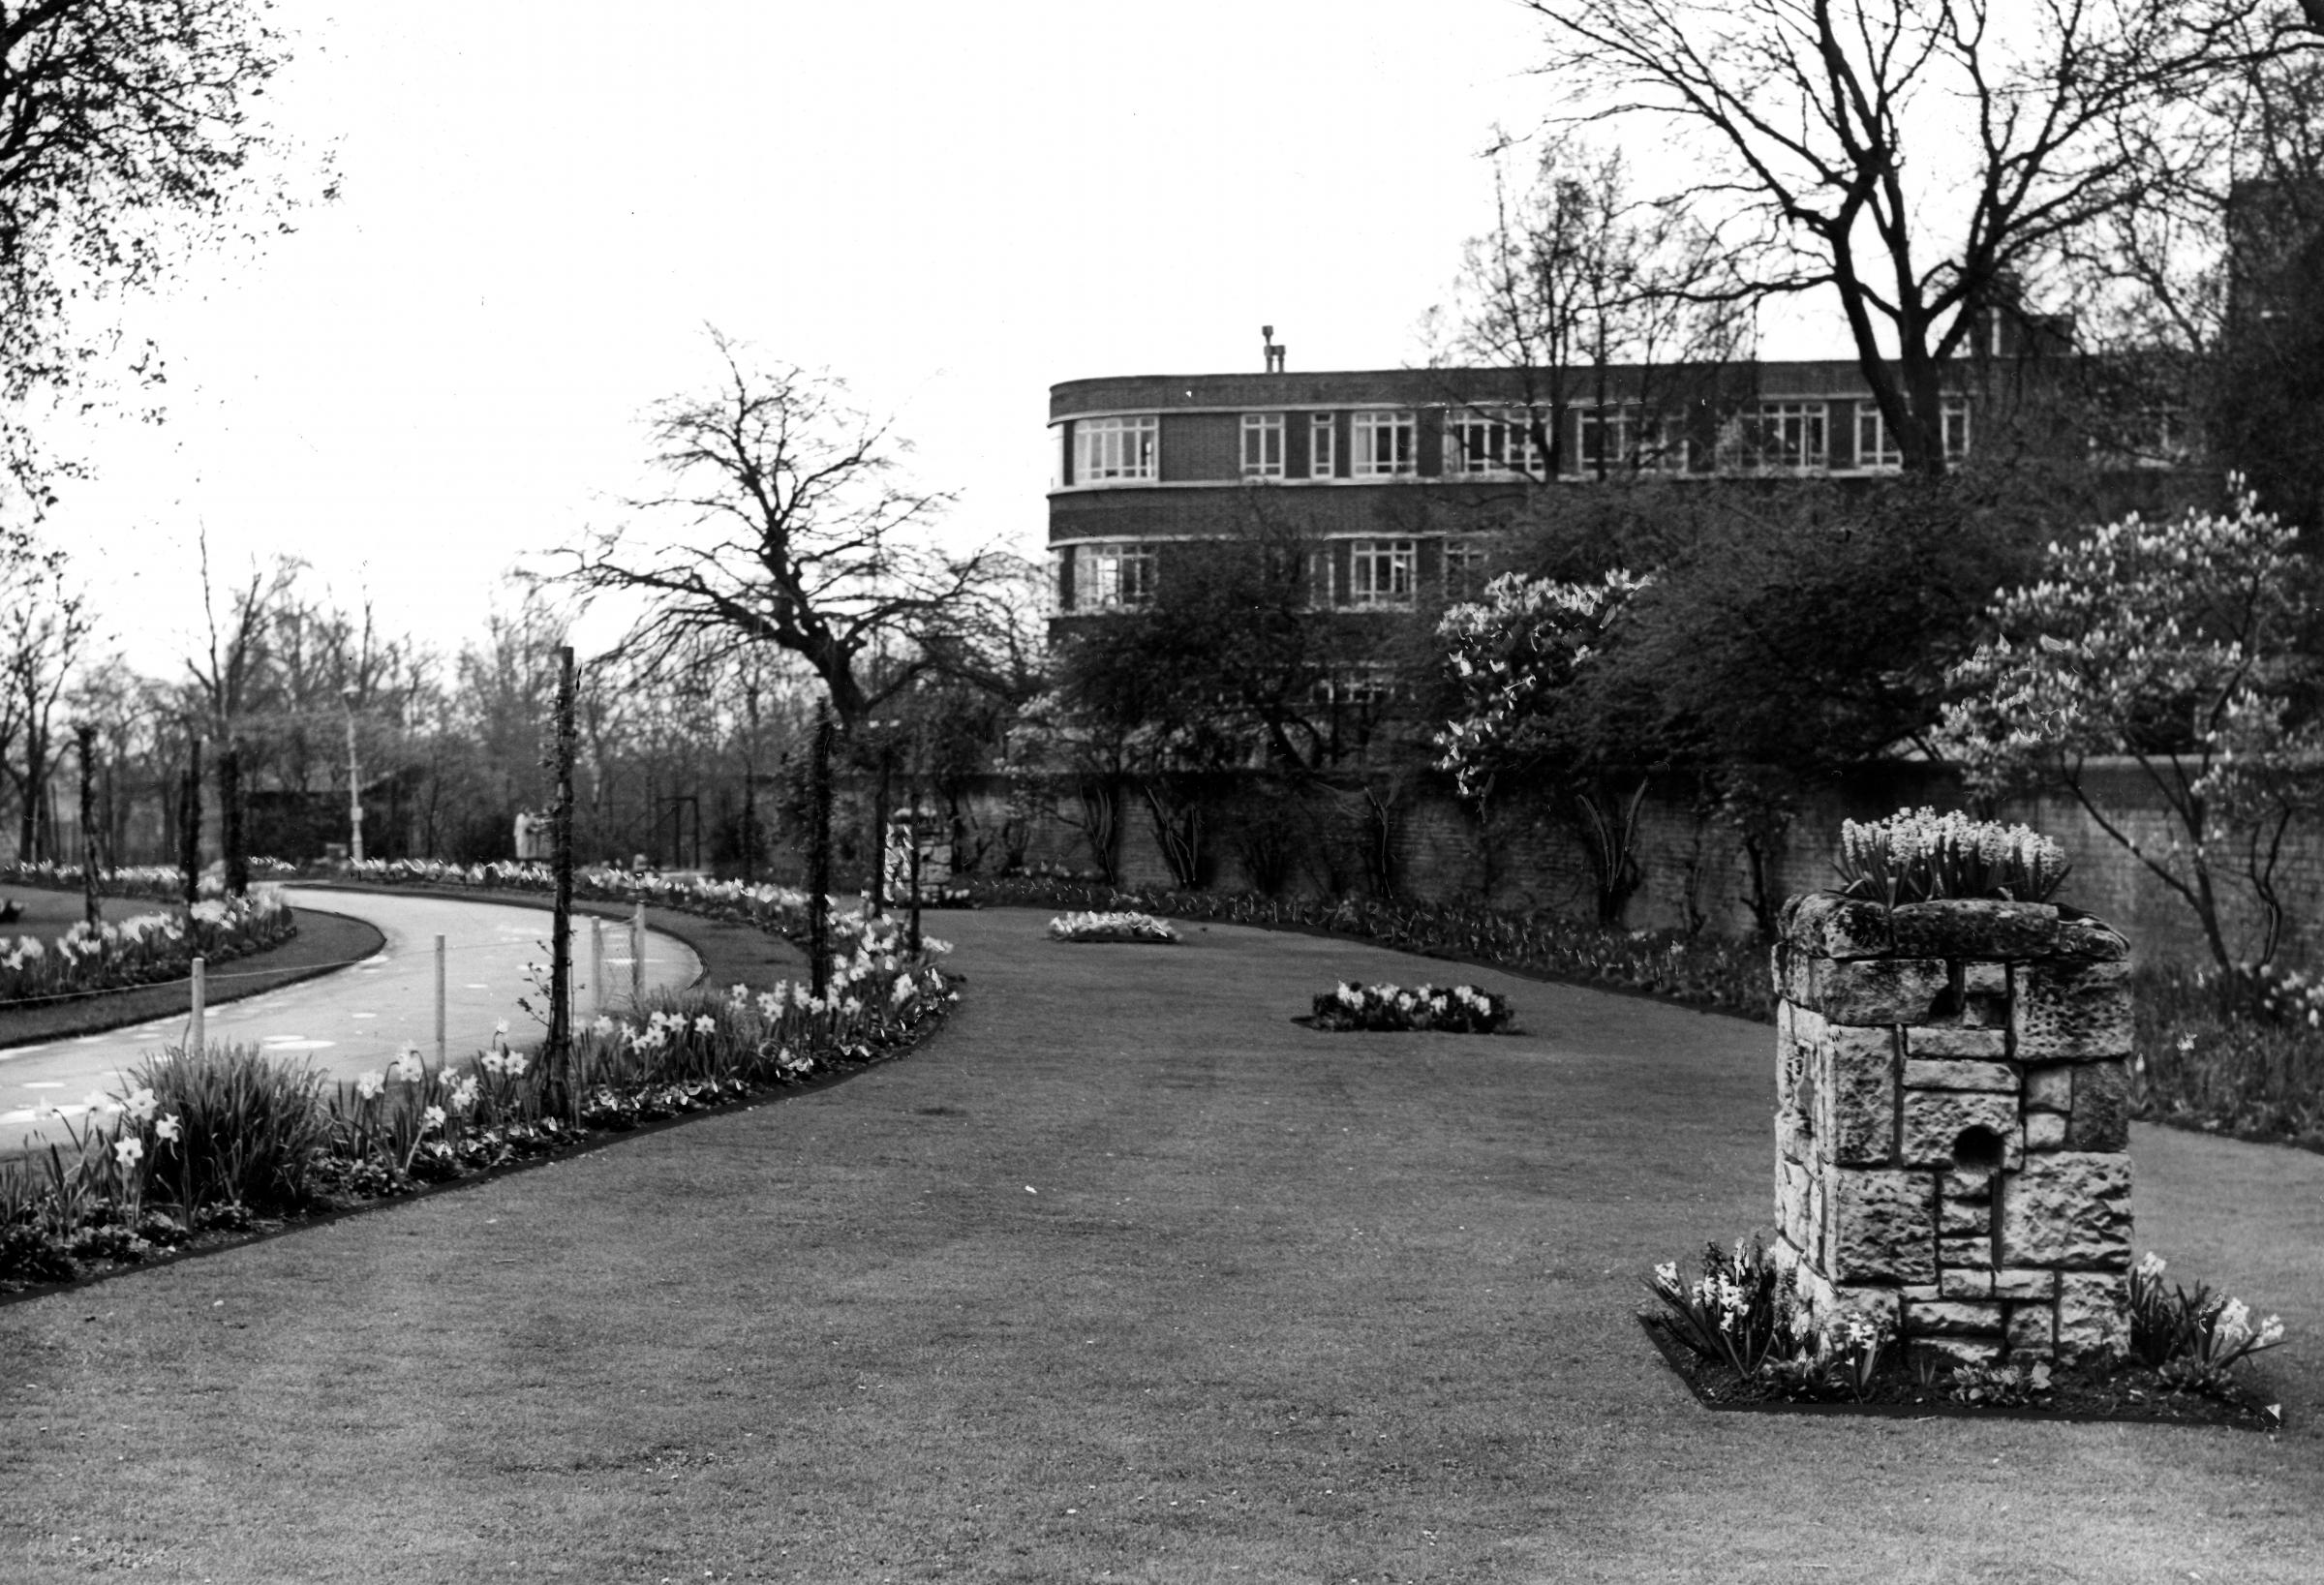 Southampton Parks. THE SOUTHERN DAILY ECHO ARCHIVES. VIEW FROM THE PAST. April 24, 1964.